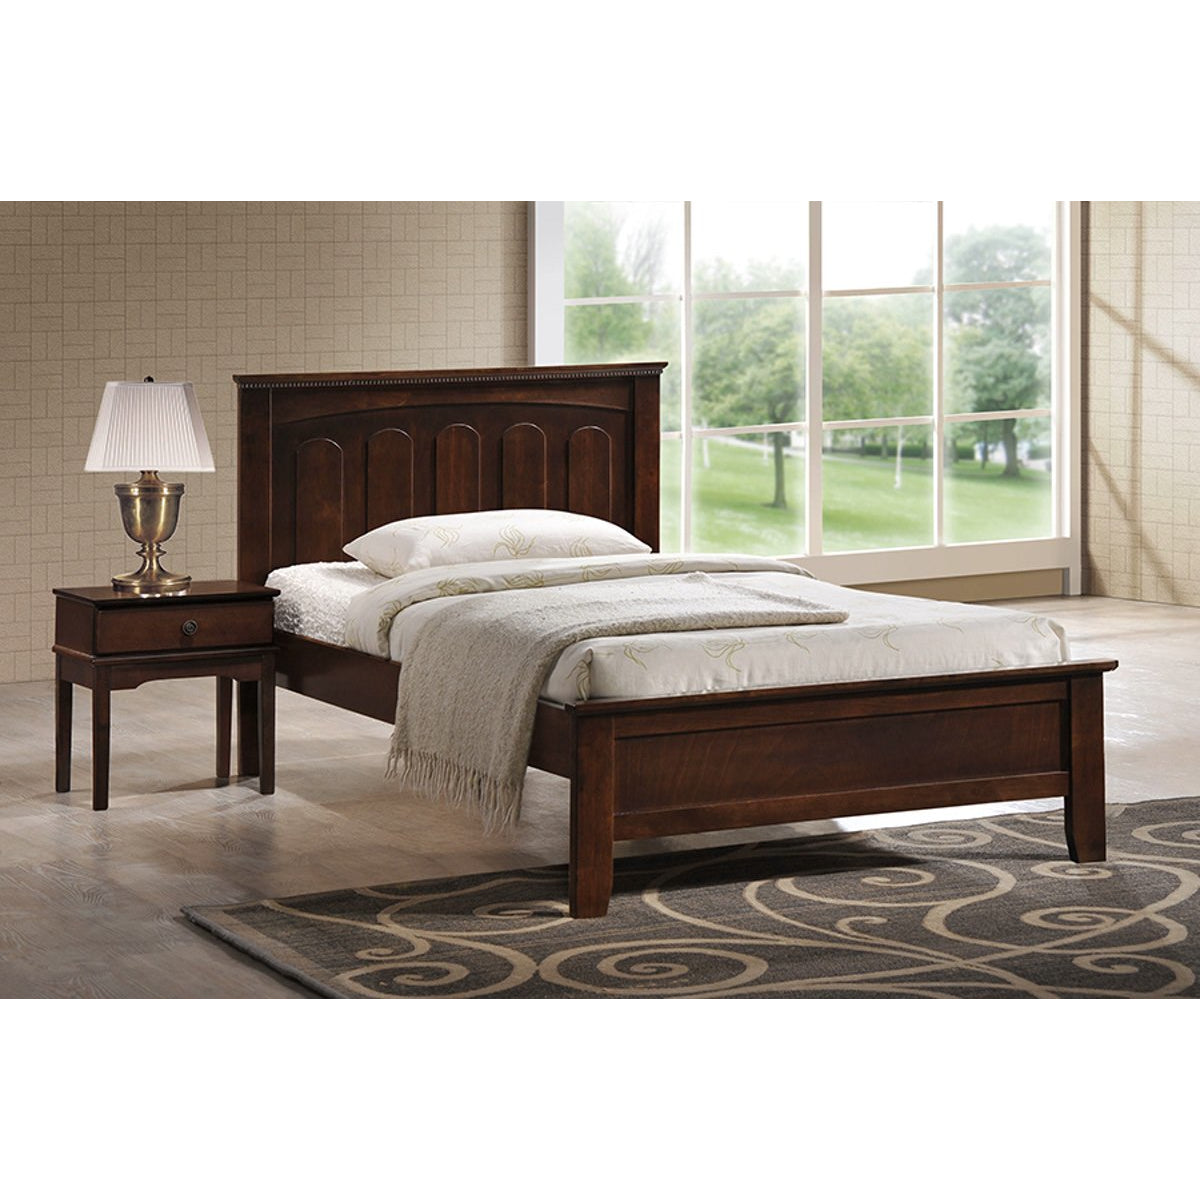 Baxton Studio Spuma Cappuccino Wood Contemporary Full-Size Bed Baxton Studio-beds-Minimal And Modern - 5